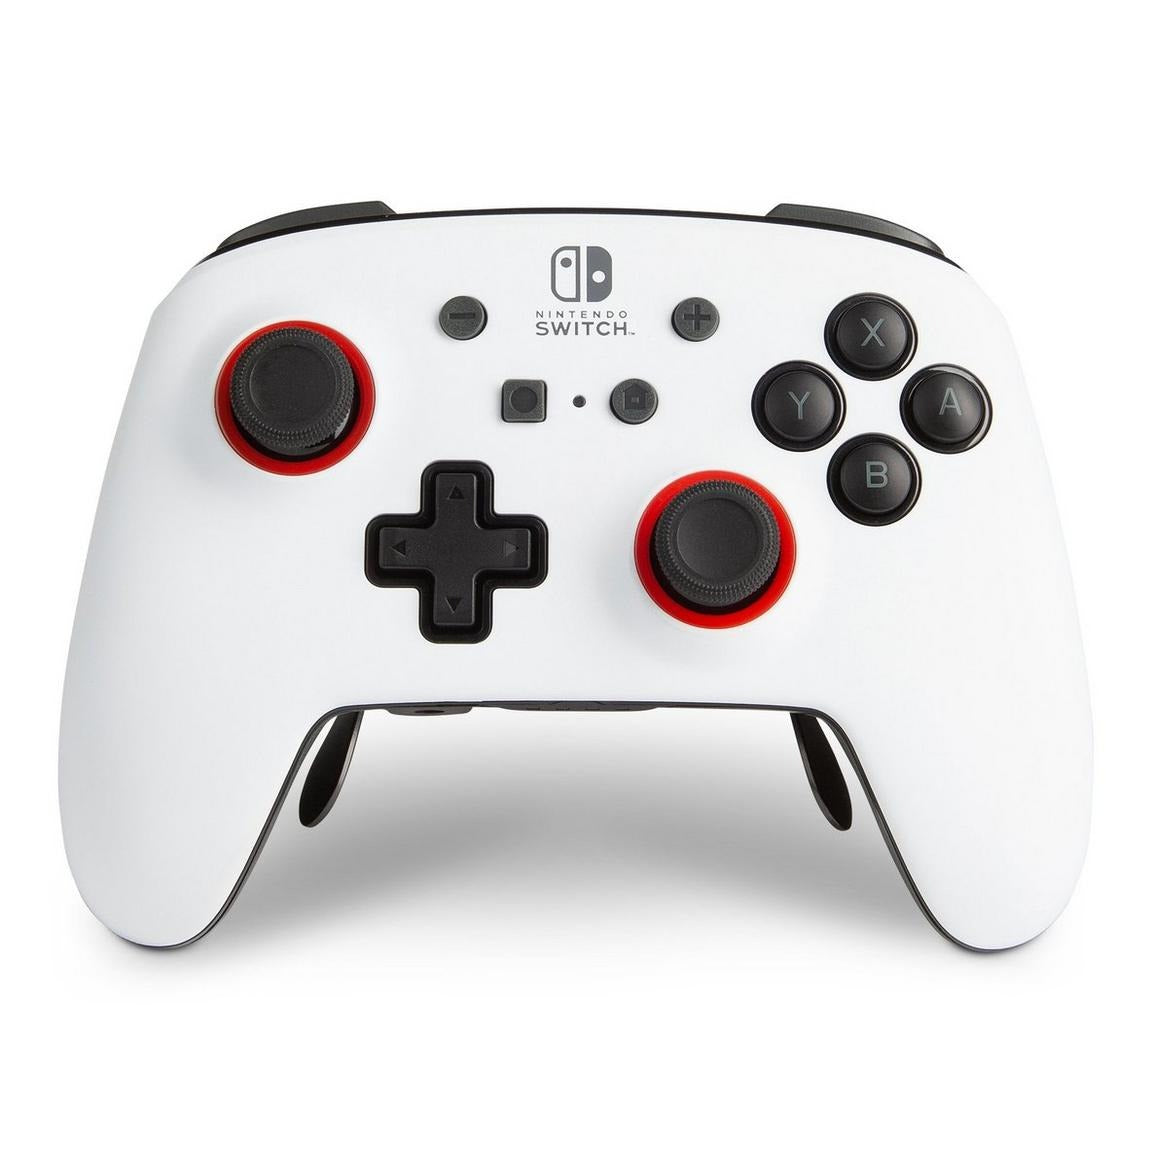 PowerA FUSION Pro Wireless Bluetooth Controller for Nintendo Switch - White (Certified Refurbished)